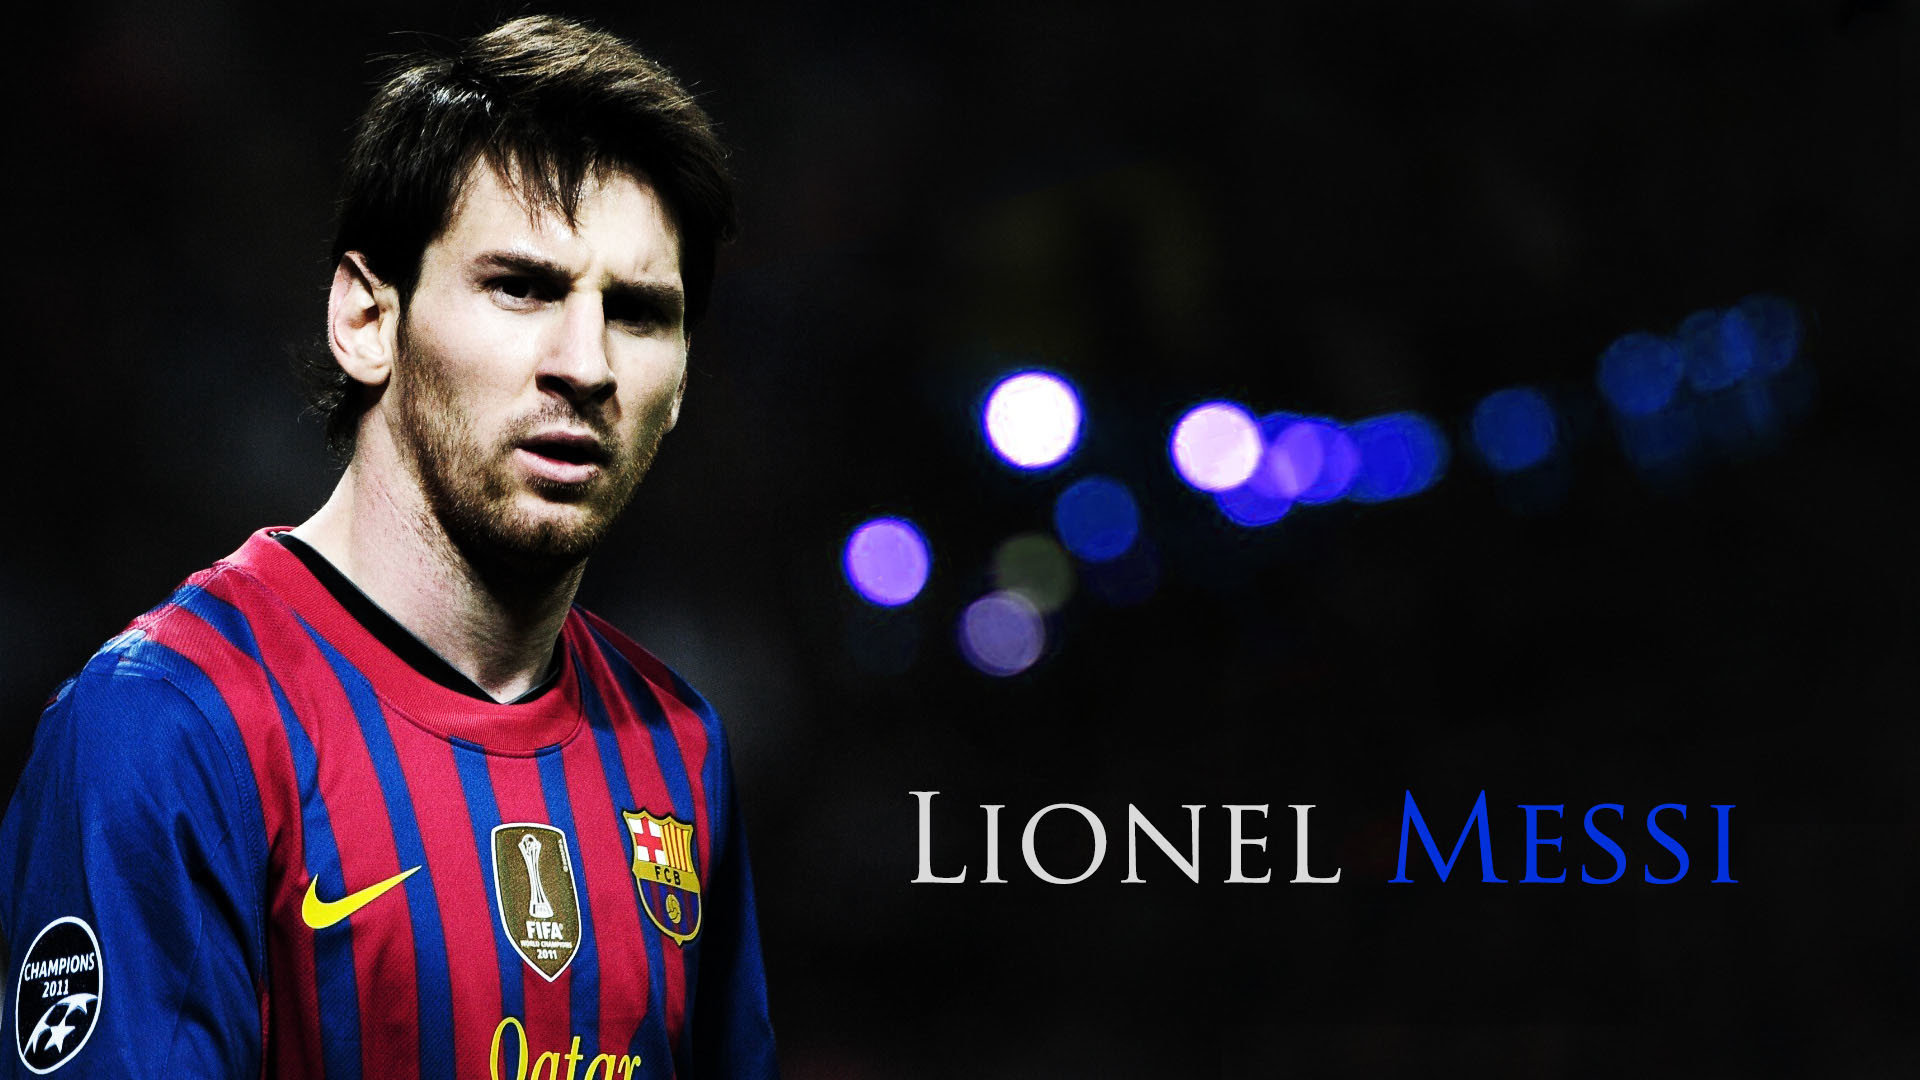 1920x1080 Lionel Messi By JoaoDesign HD desktop wallpaper High Definition | HD  Wallpapers | Pinterest | Messi and Wallpaper